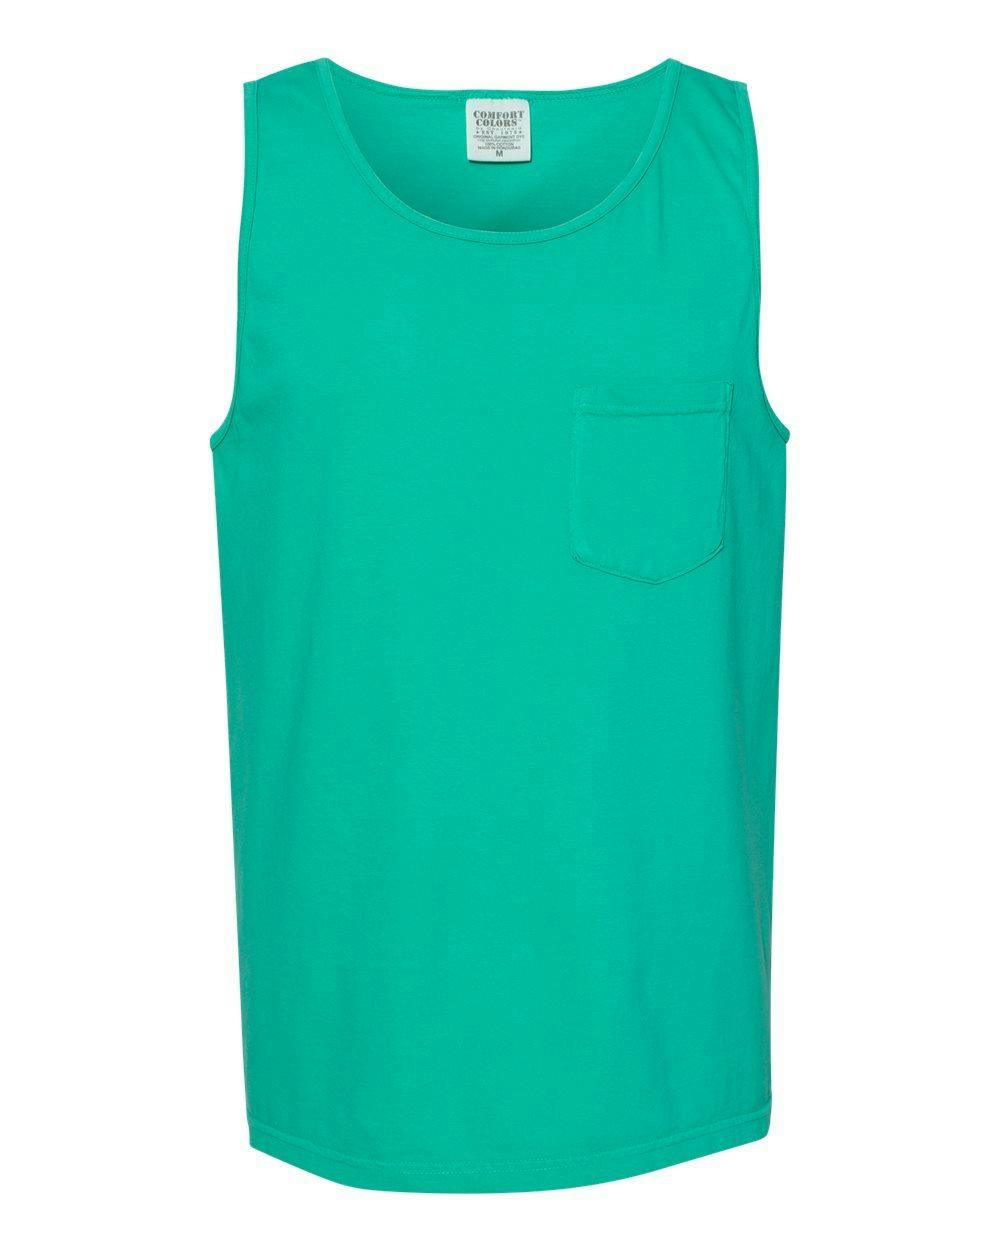 Image for Garment-Dyed Heavyweight Pocket Tank Top - 9330